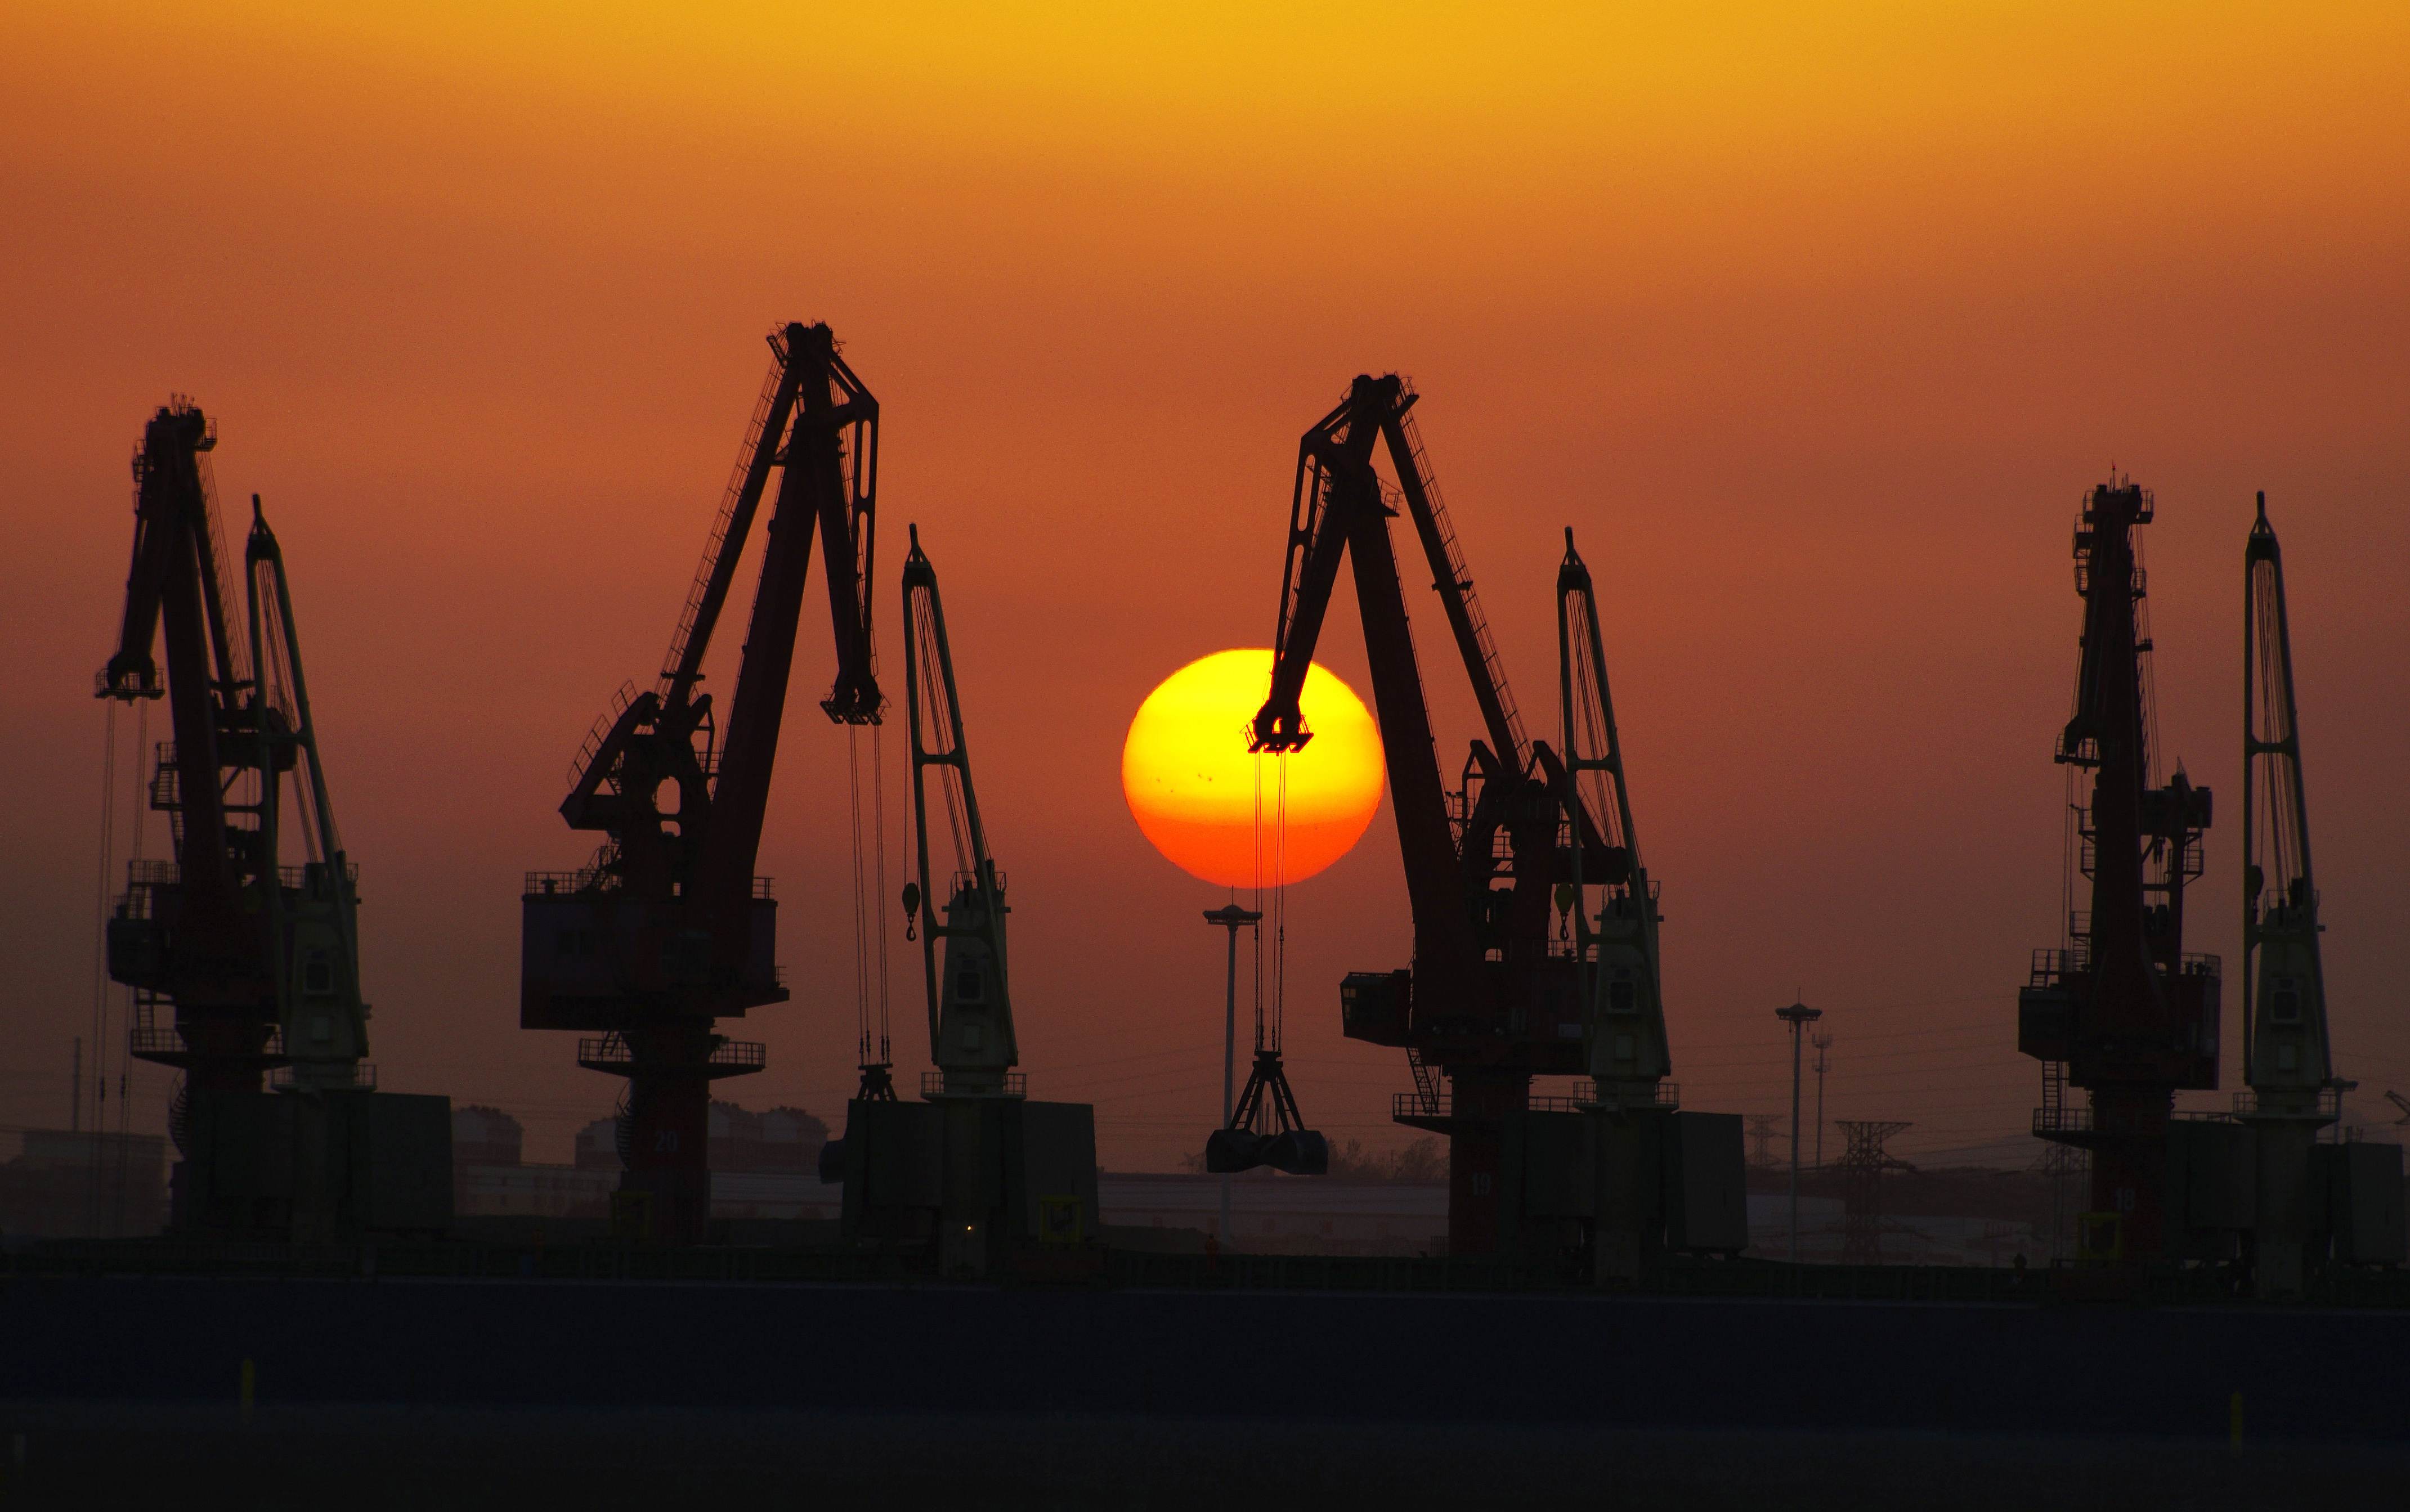 This picture taken on October 11, 2013 shows the cranes at Rizhao port in Rizhao, east China's Shandong province. An unexpected drop in exports led to China's trade surplus narrowing to a disappointing 15.2 billion USD in September from 28.6 billion USD in August, customs figures showed October 12. AFP PHOTO CHINA OUT